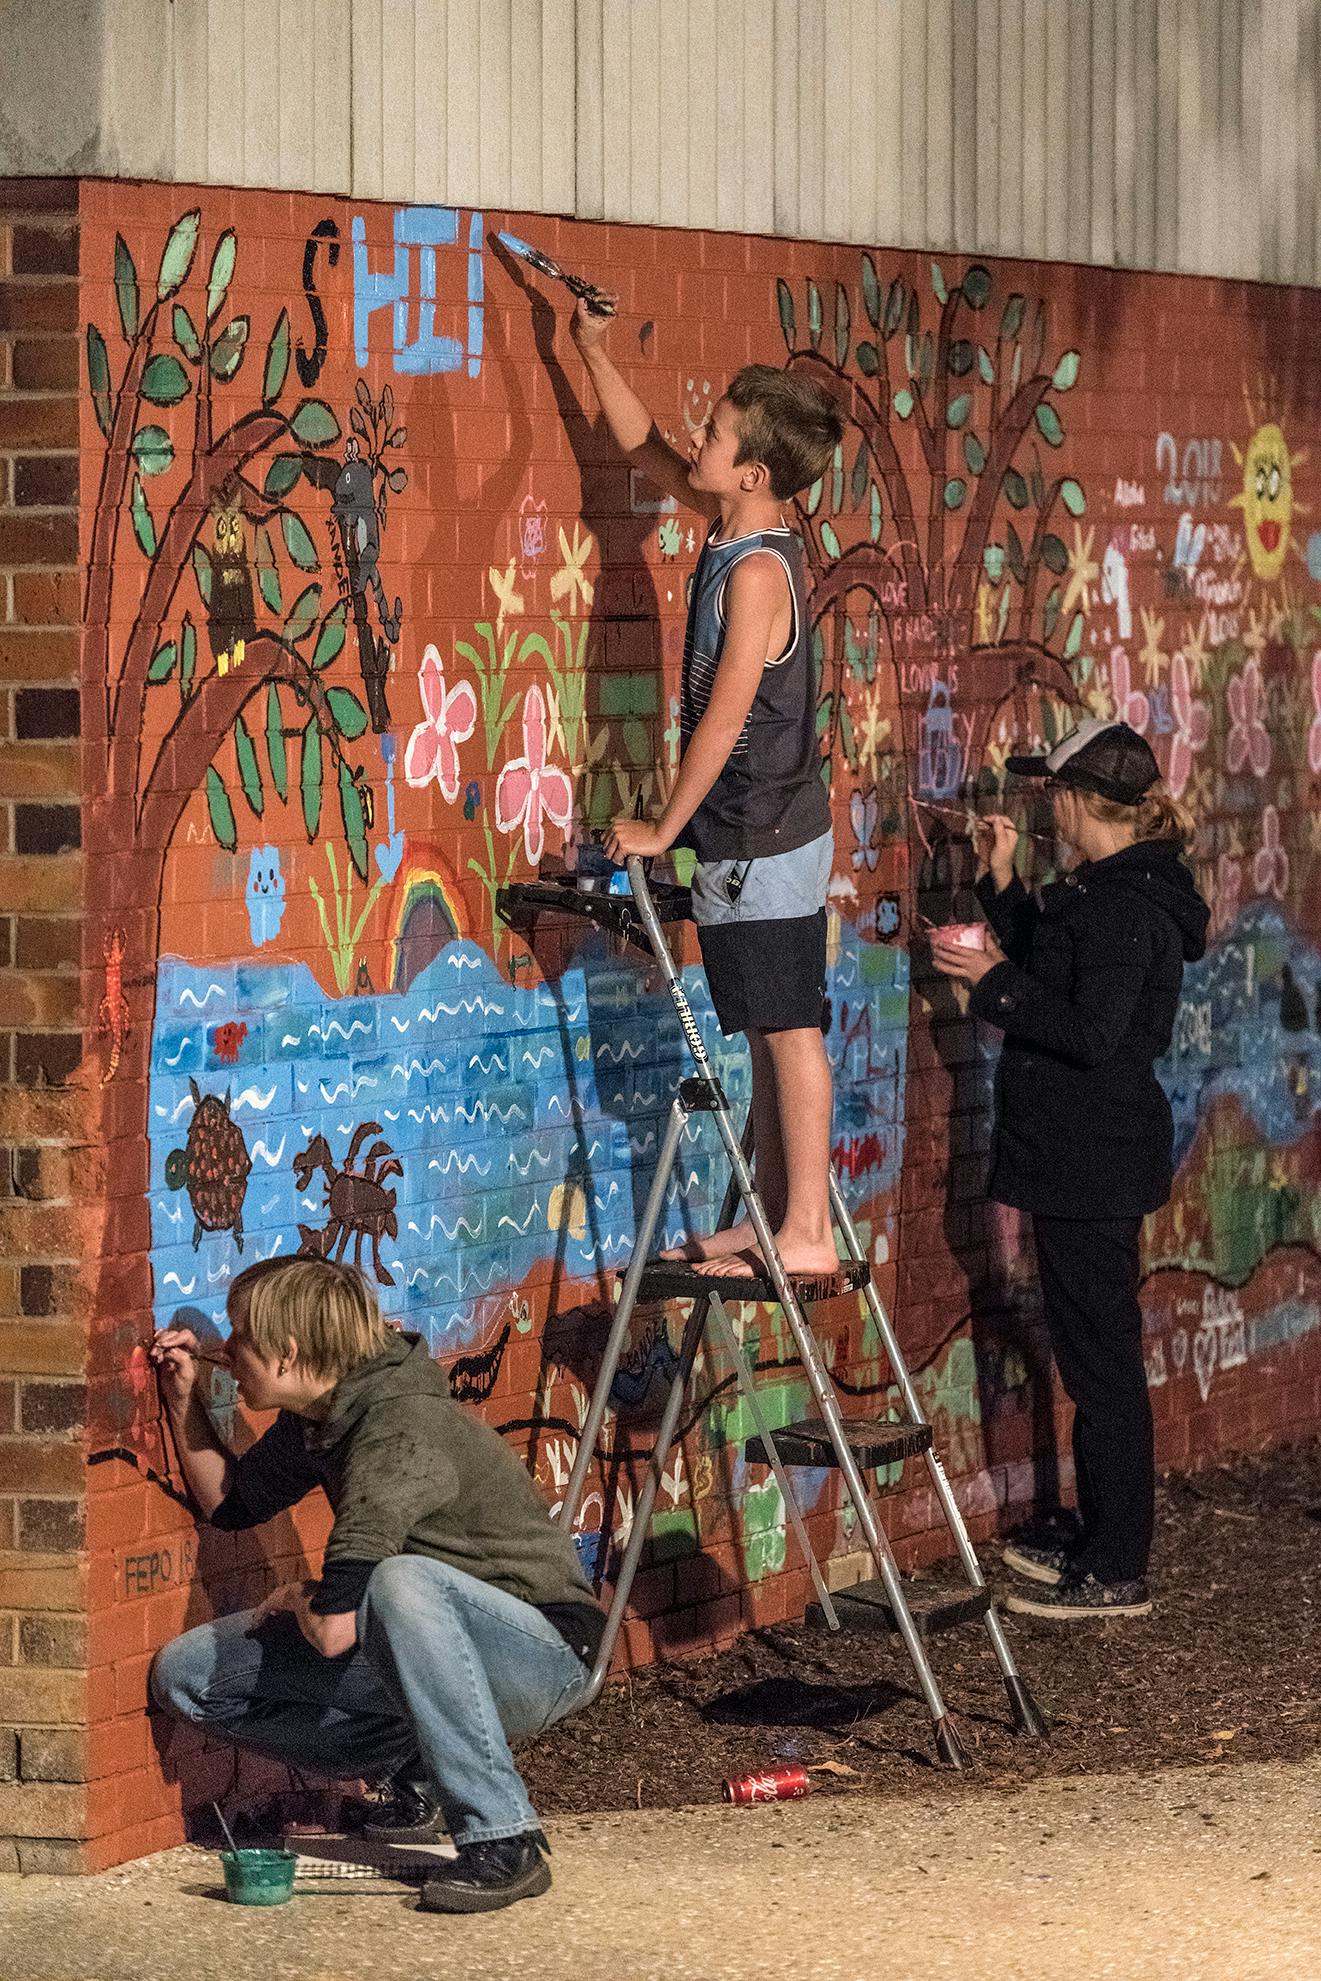 Autumn Lights - Completing the mural